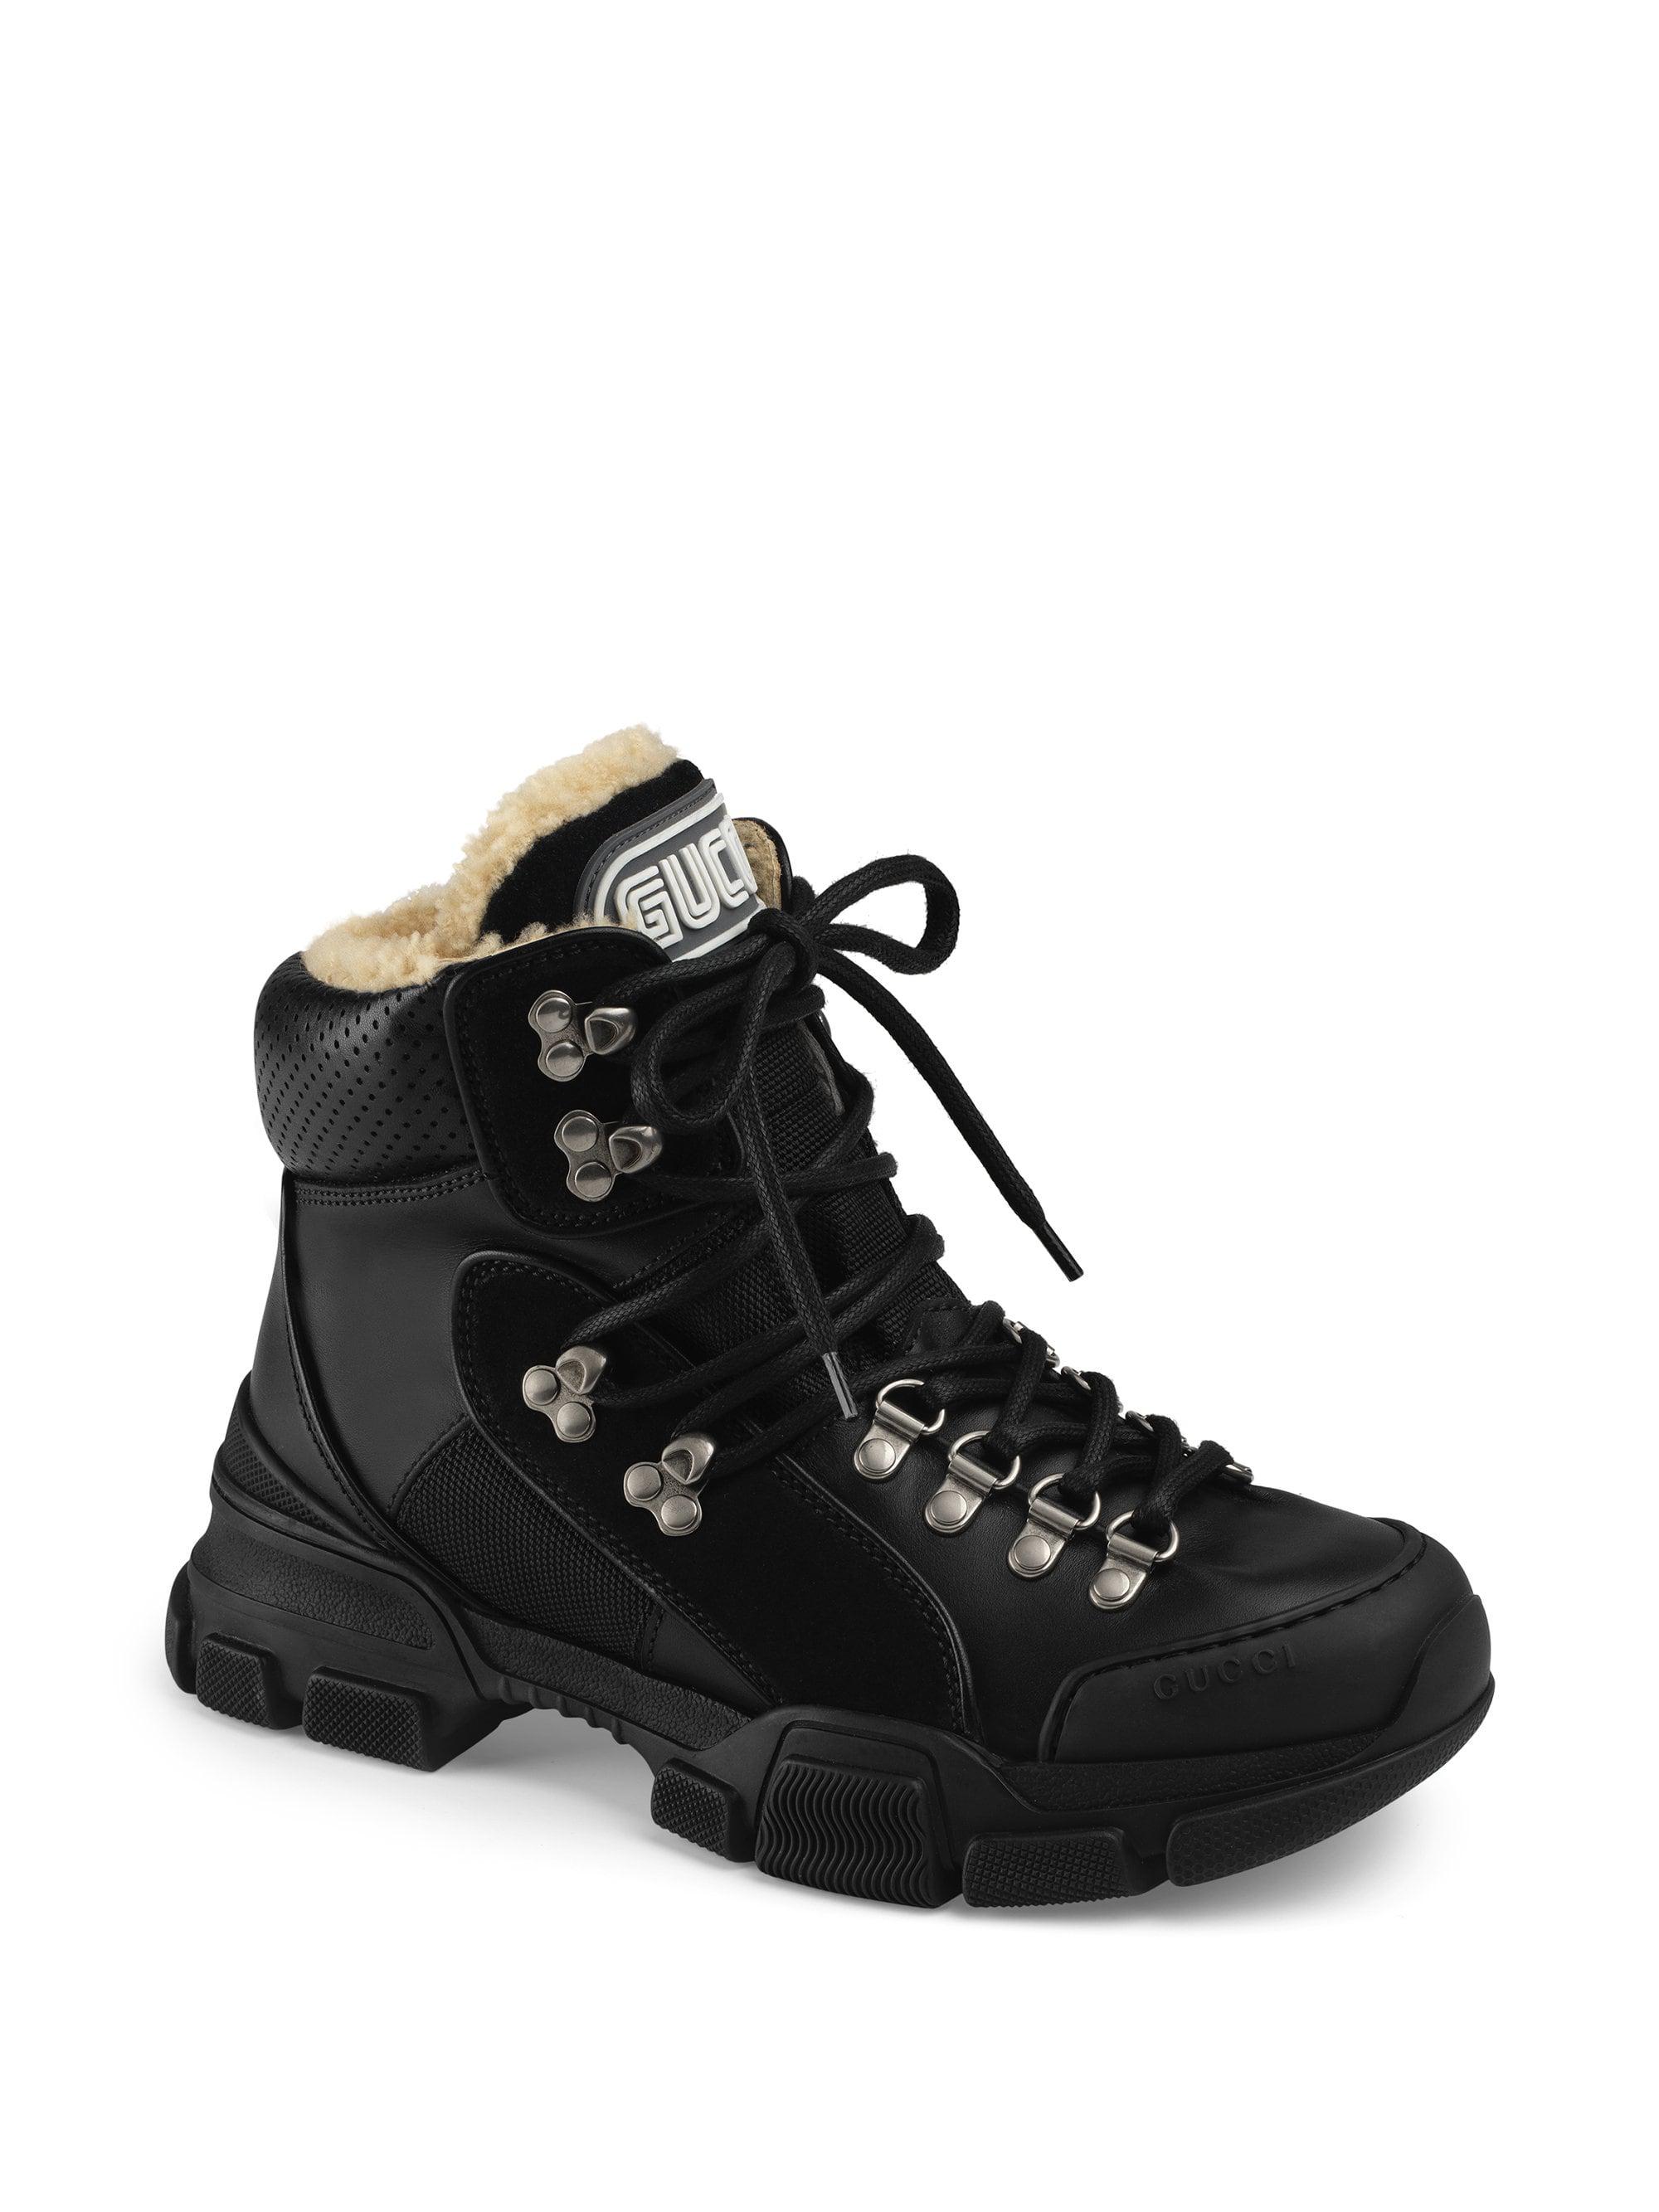 Gucci Suede Flashtrek Shearling-lined Hiker Boots in Black - Lyst